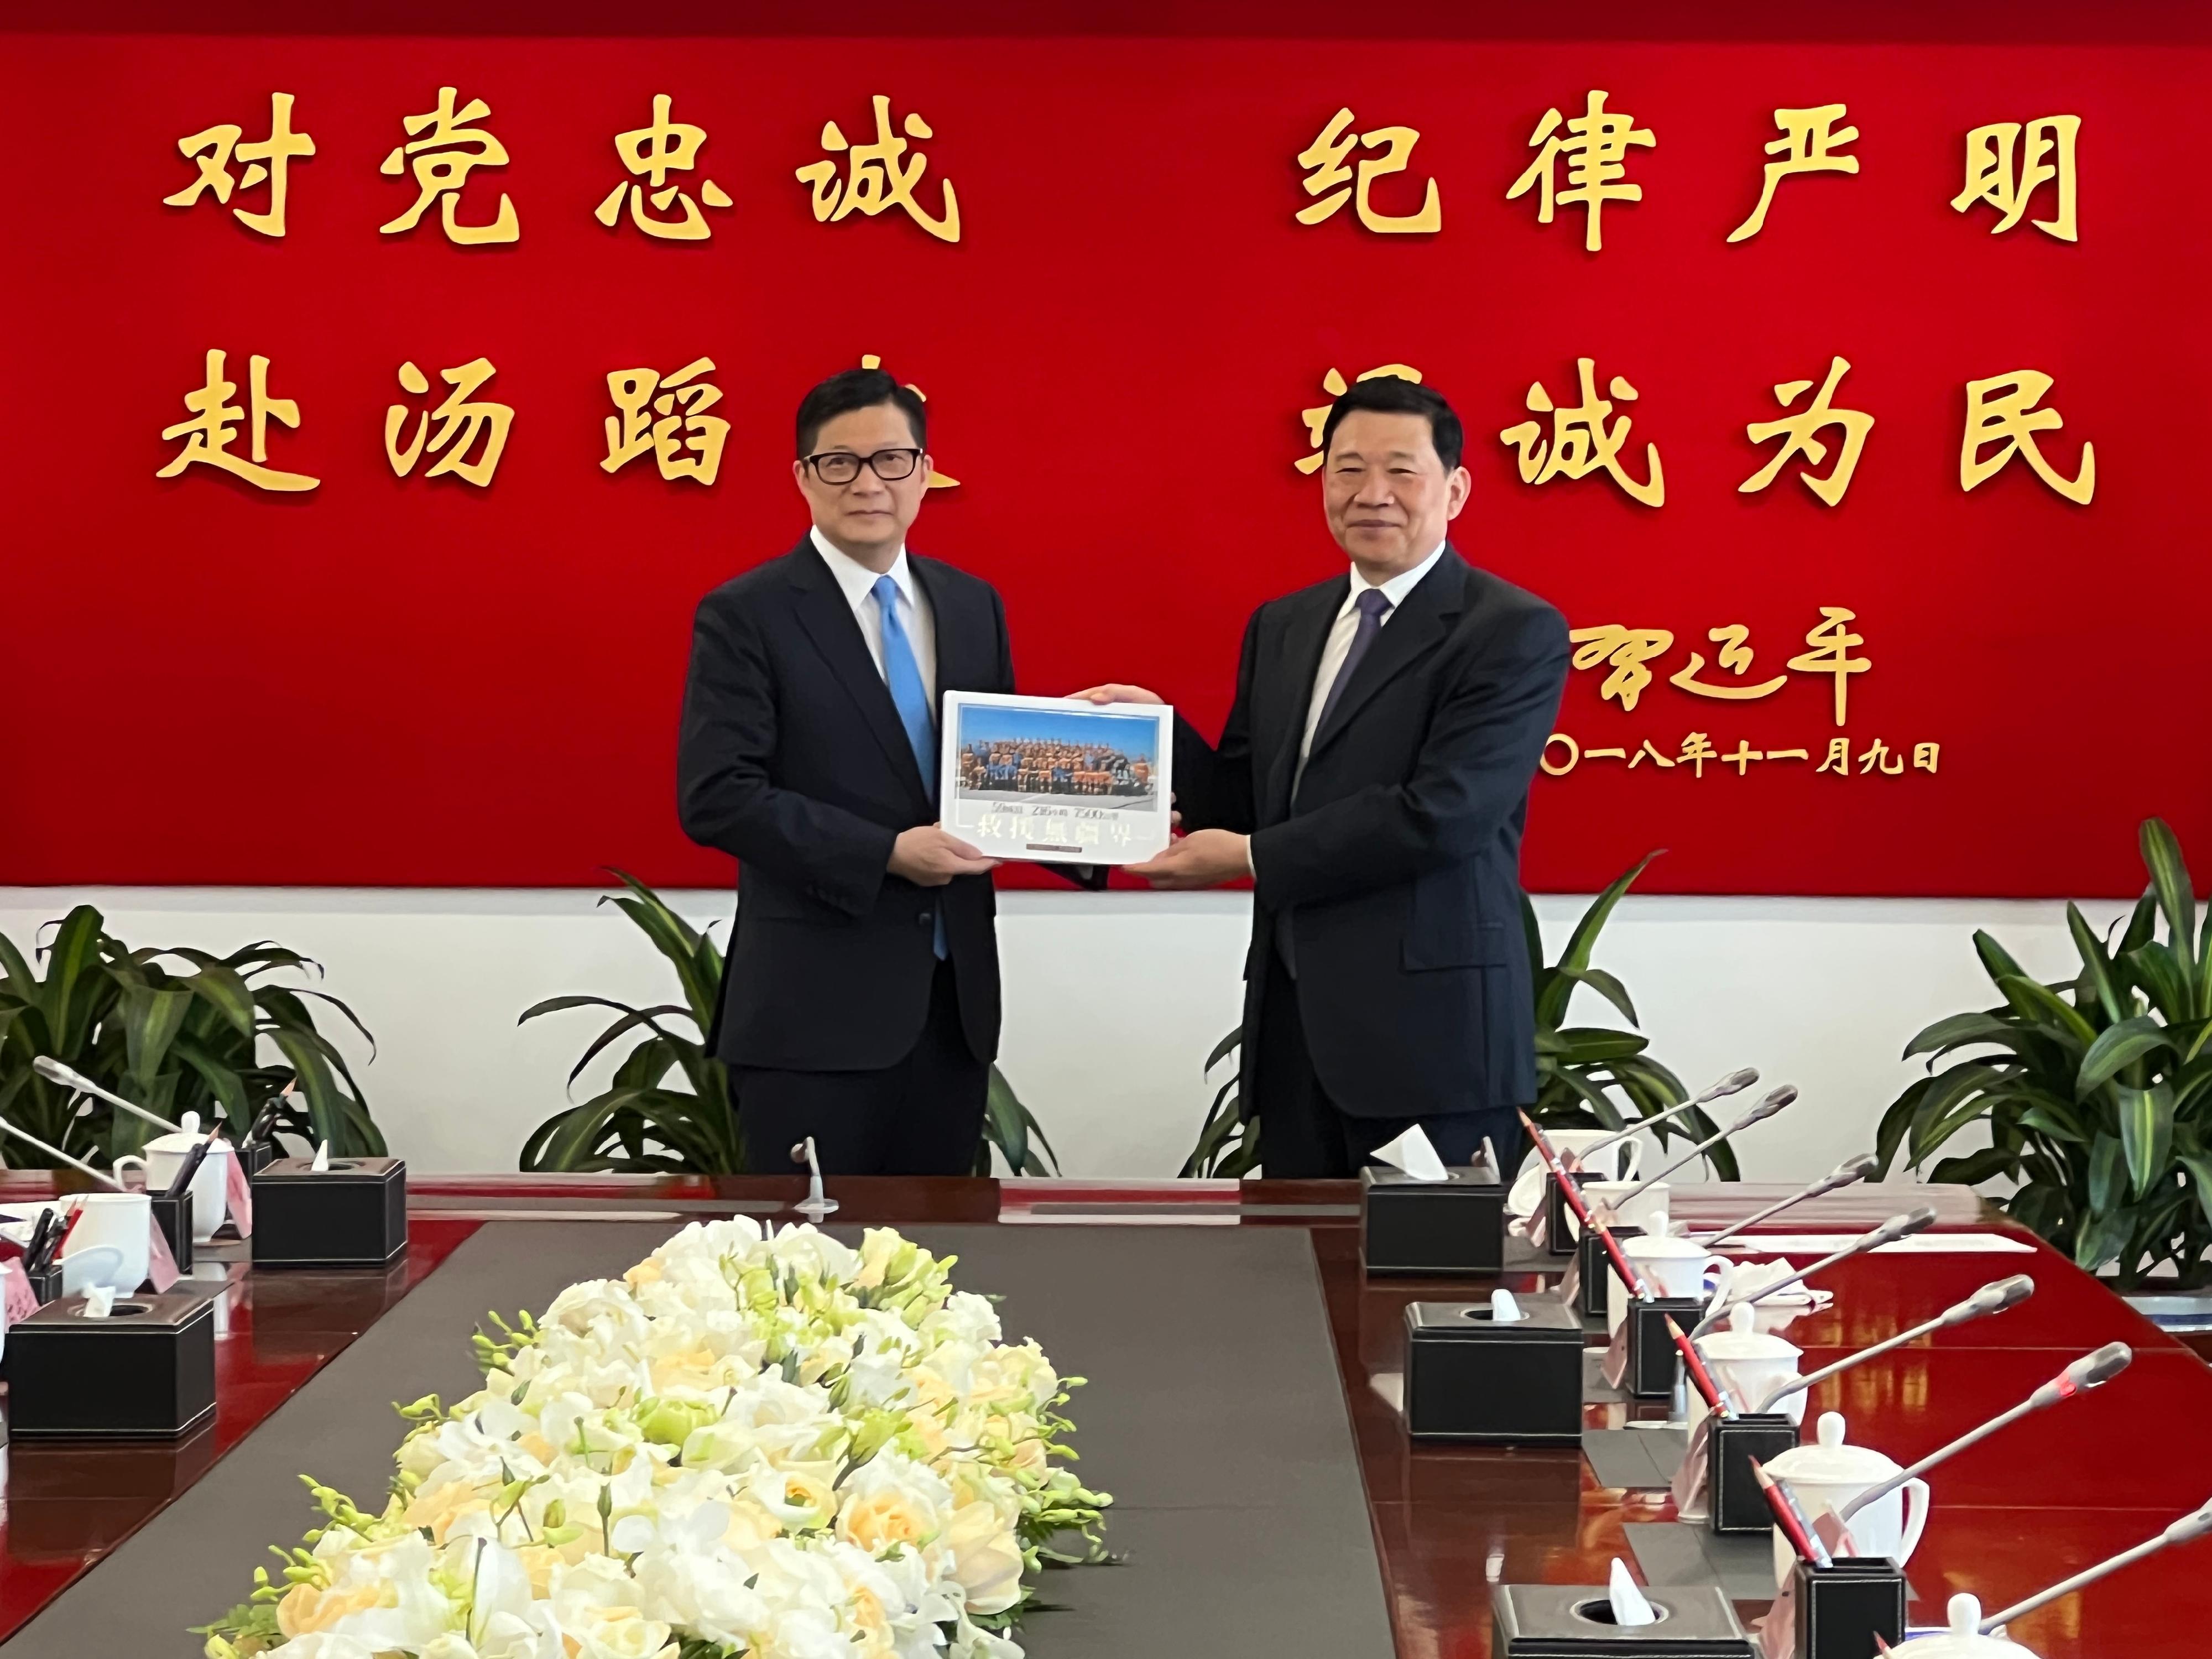 The Secretary for Security, Mr Tang Ping-keung, conducted the third day of his visit to Beijing today (April 26). Photo shows Mr Tang (left) calling on the Minister of Emergency Management, Mr Wang Xiangxi (right), and presenting to him a photo album of the Fire Services Department on the search and rescue operations in the earthquake-stricken areas in Türkiye earlier.